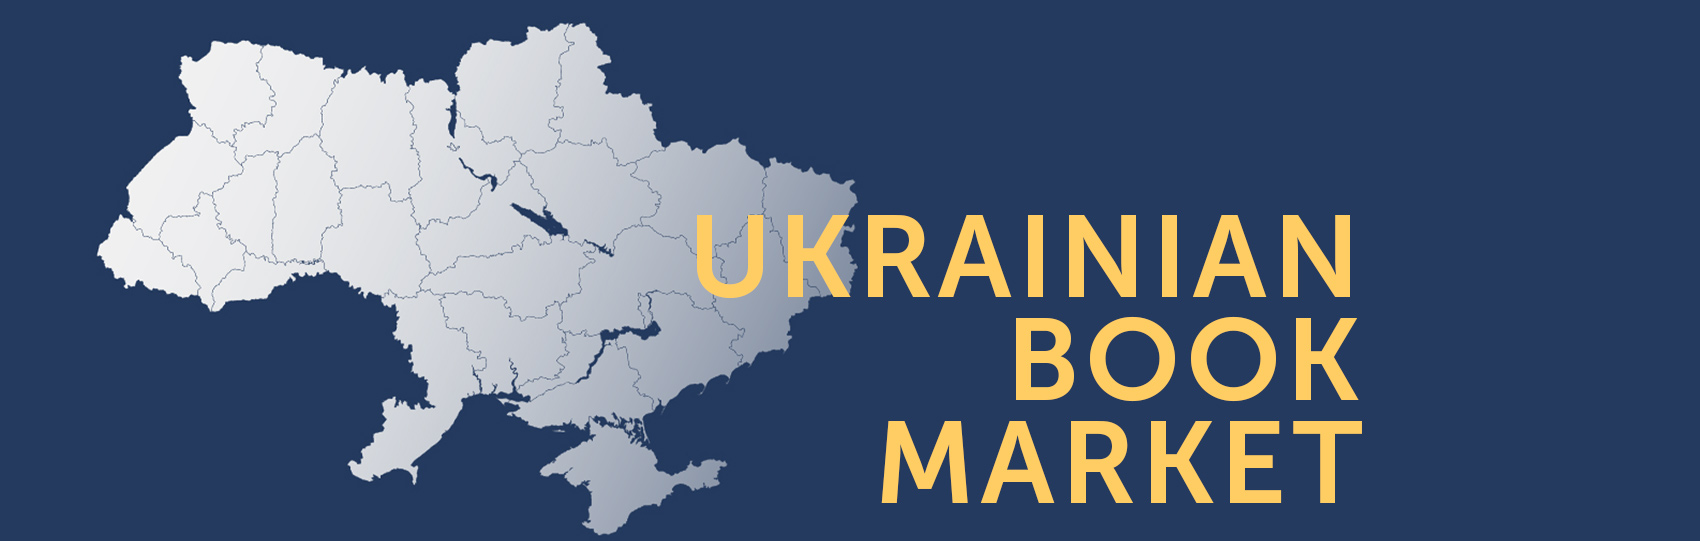 The Bookseller - Rights - Thames & Hudson to publish illustrated history of  Ukraine's heritage for PEN Ukraine